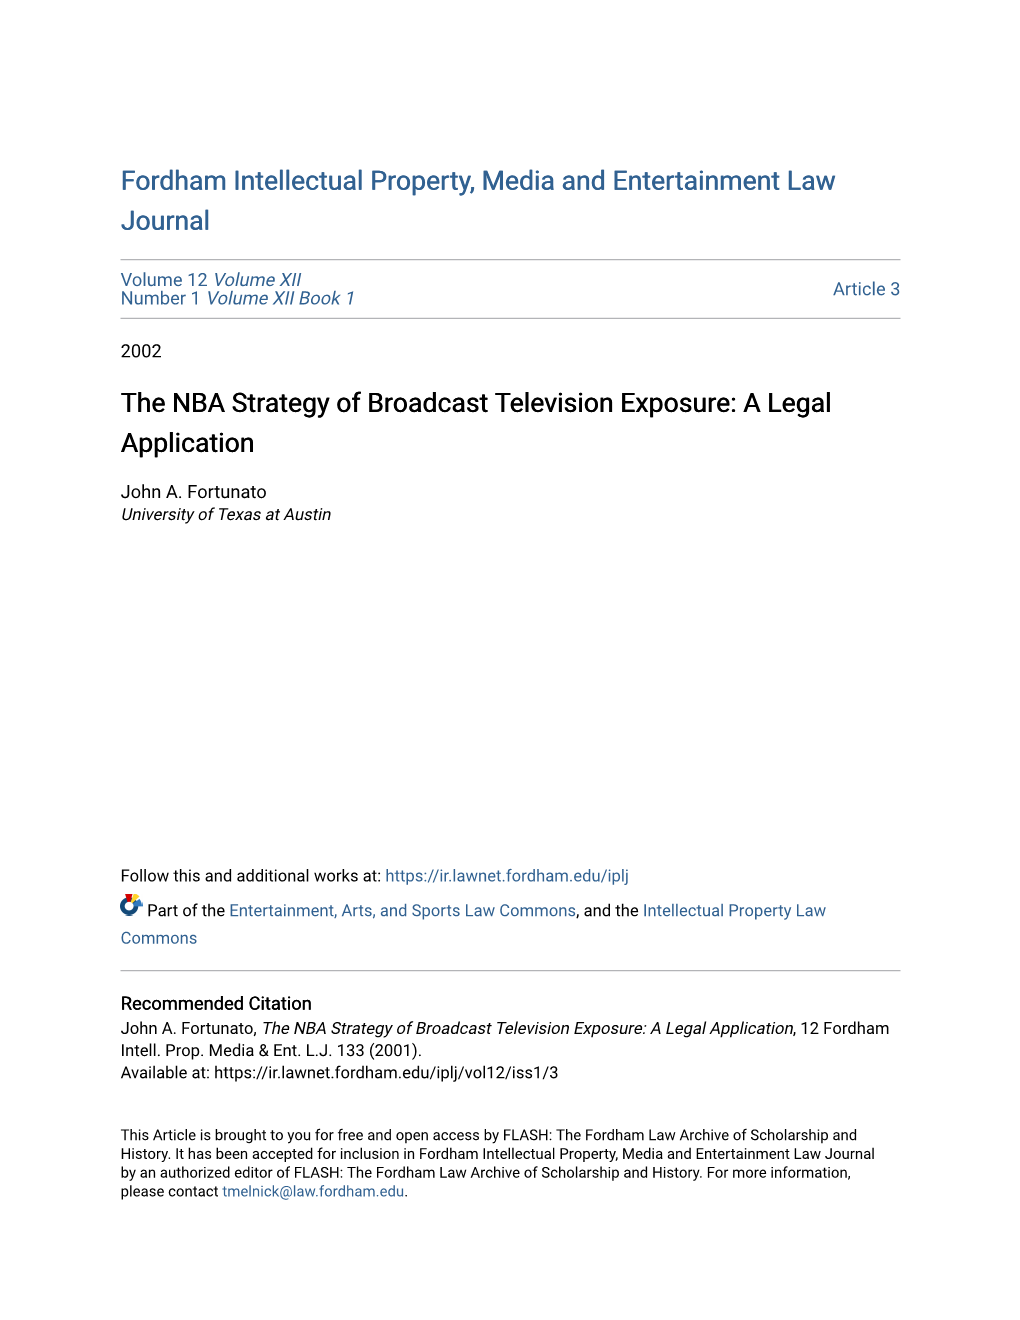 The NBA Strategy of Broadcast Television Exposure: a Legal Application